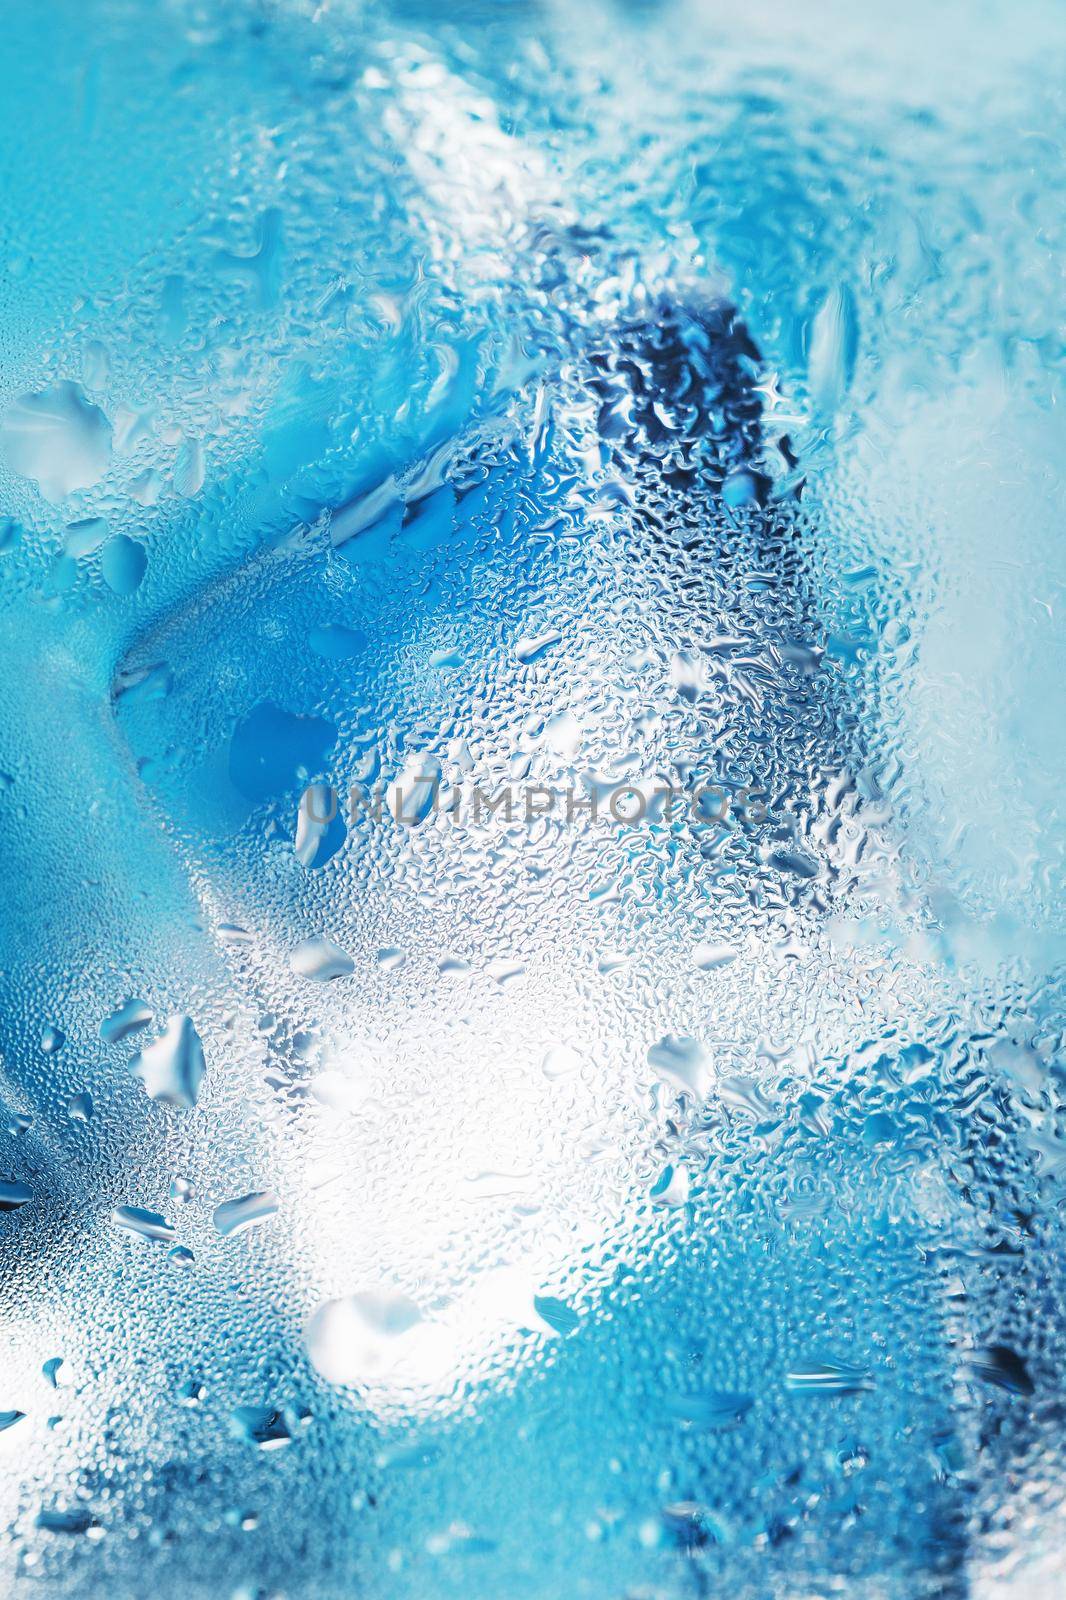 Glass with water and ice cubes on a blue background by AlexGrec